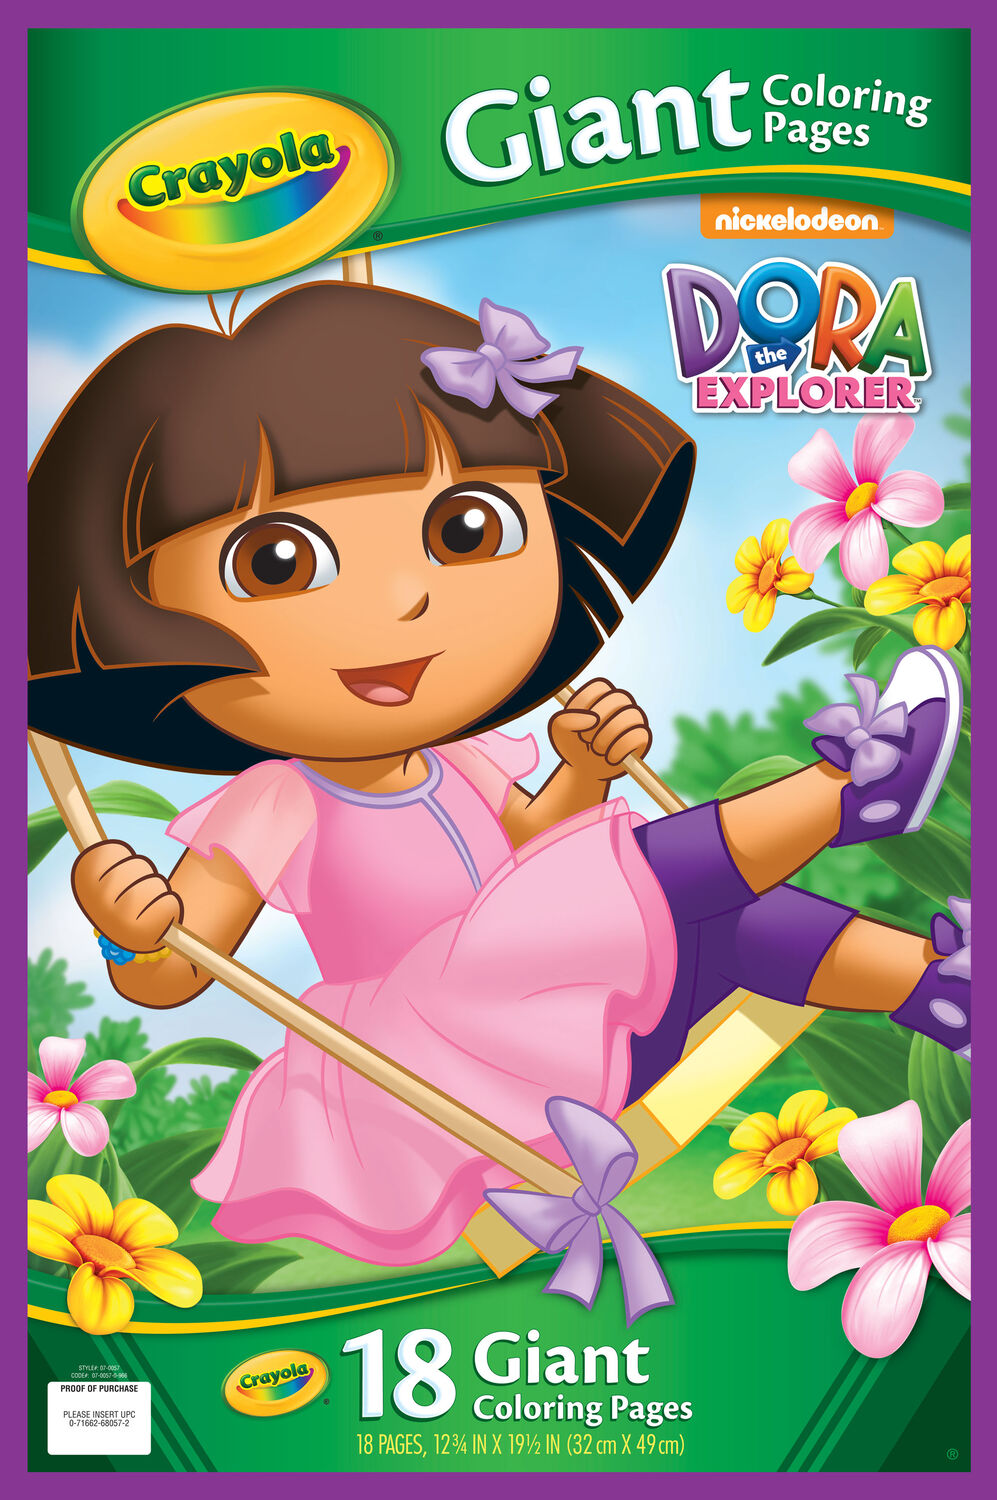 Giant Coloring Pages - Dora the Explorer | Crayola